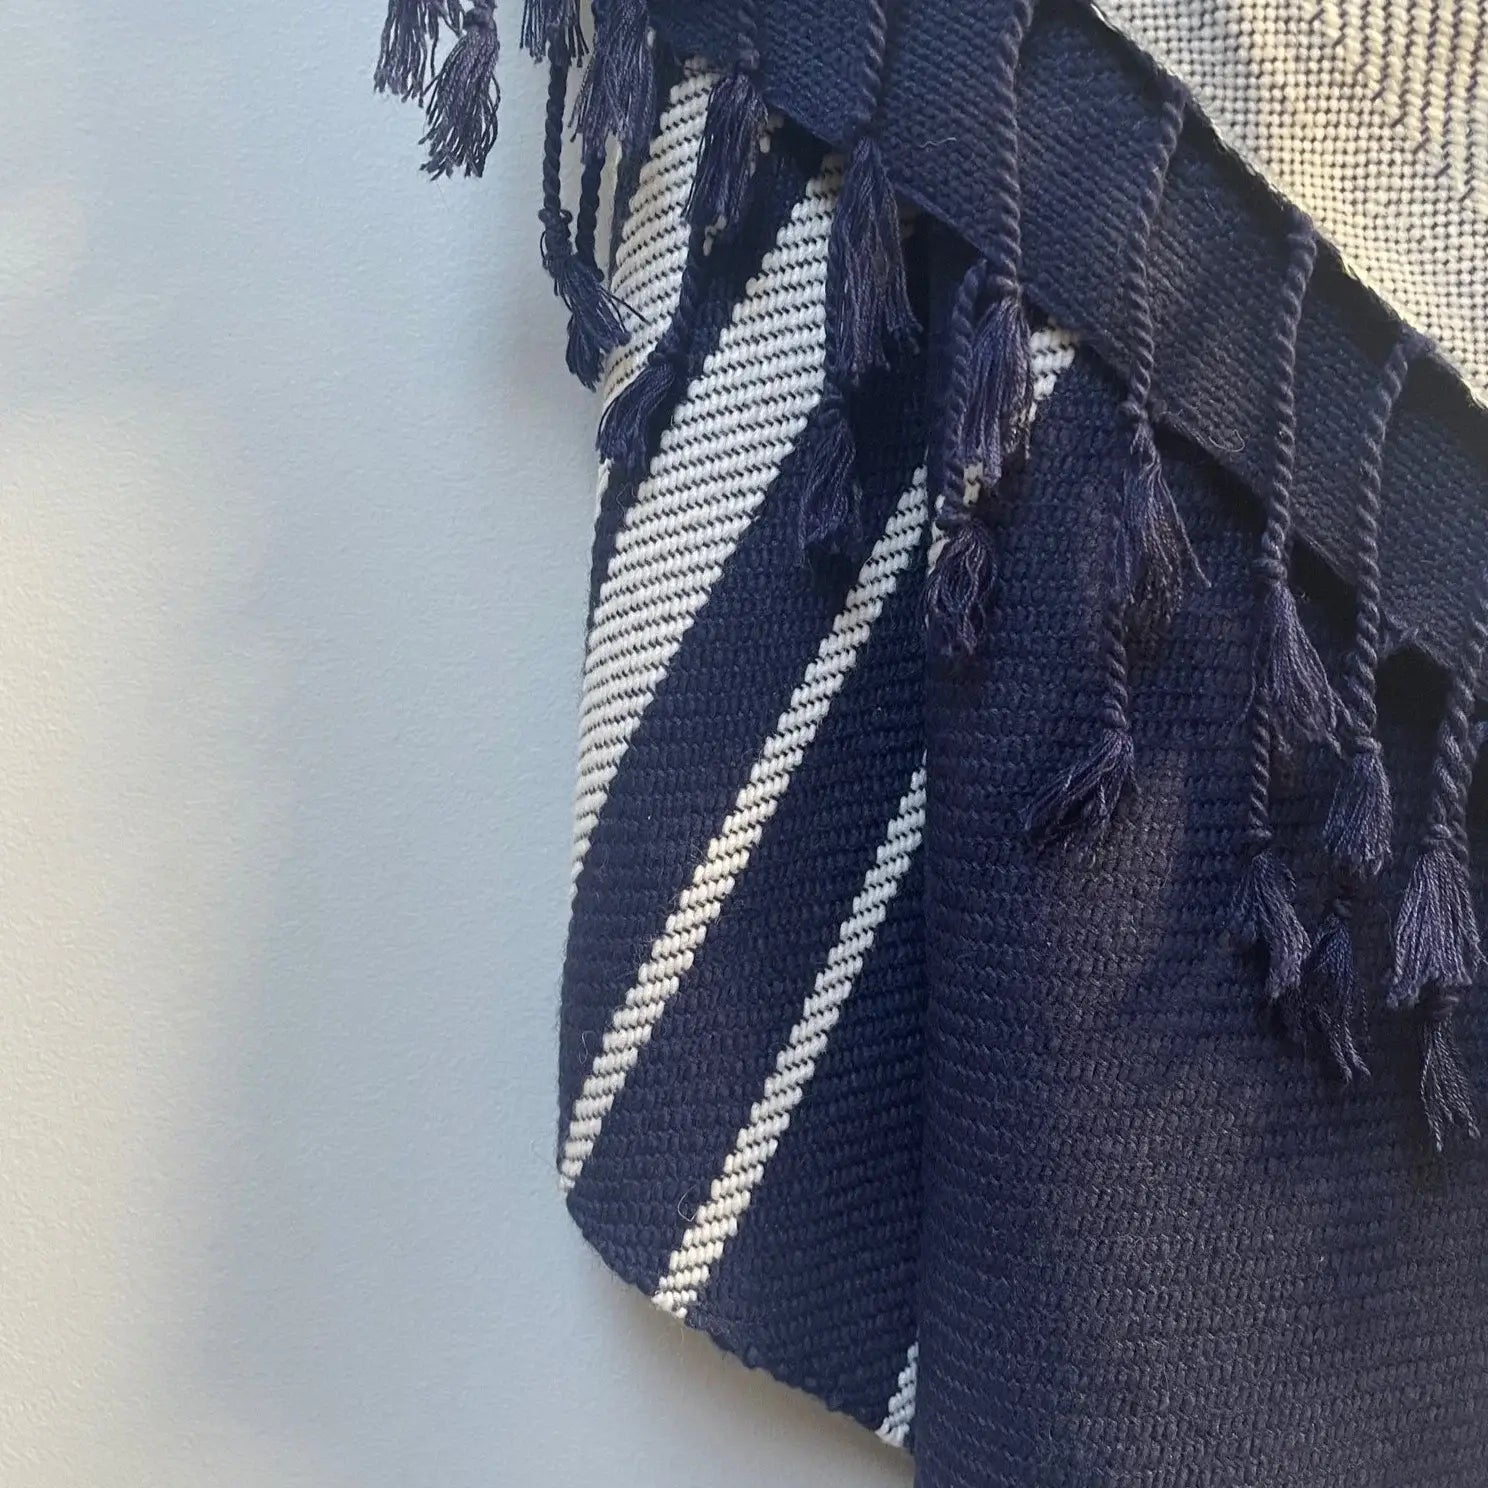 Dounia home Throw towel in Midnight blue made of Wool and cotton, Model: Tala, Close Up View